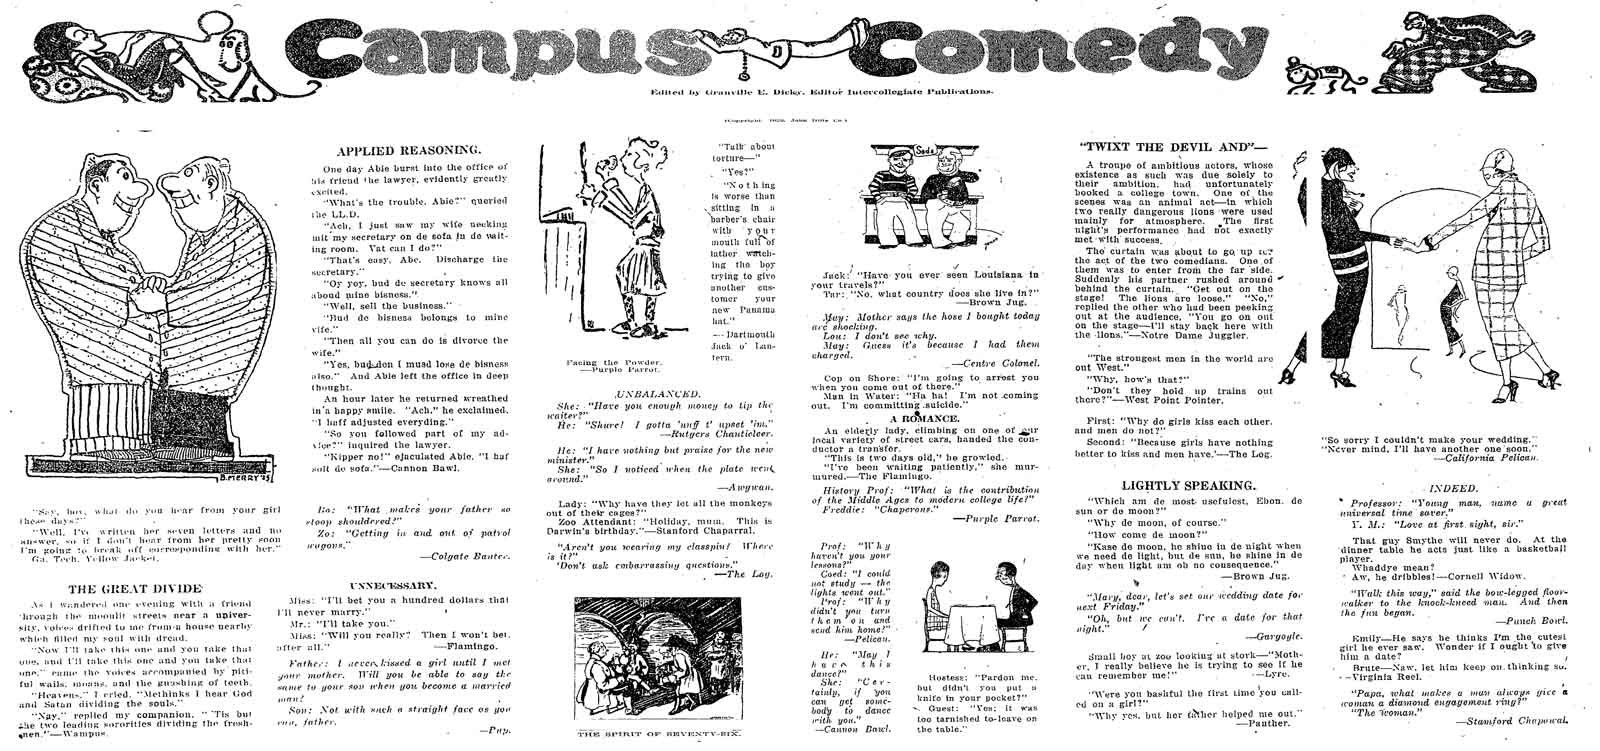 image campuscomedy251108-jpg